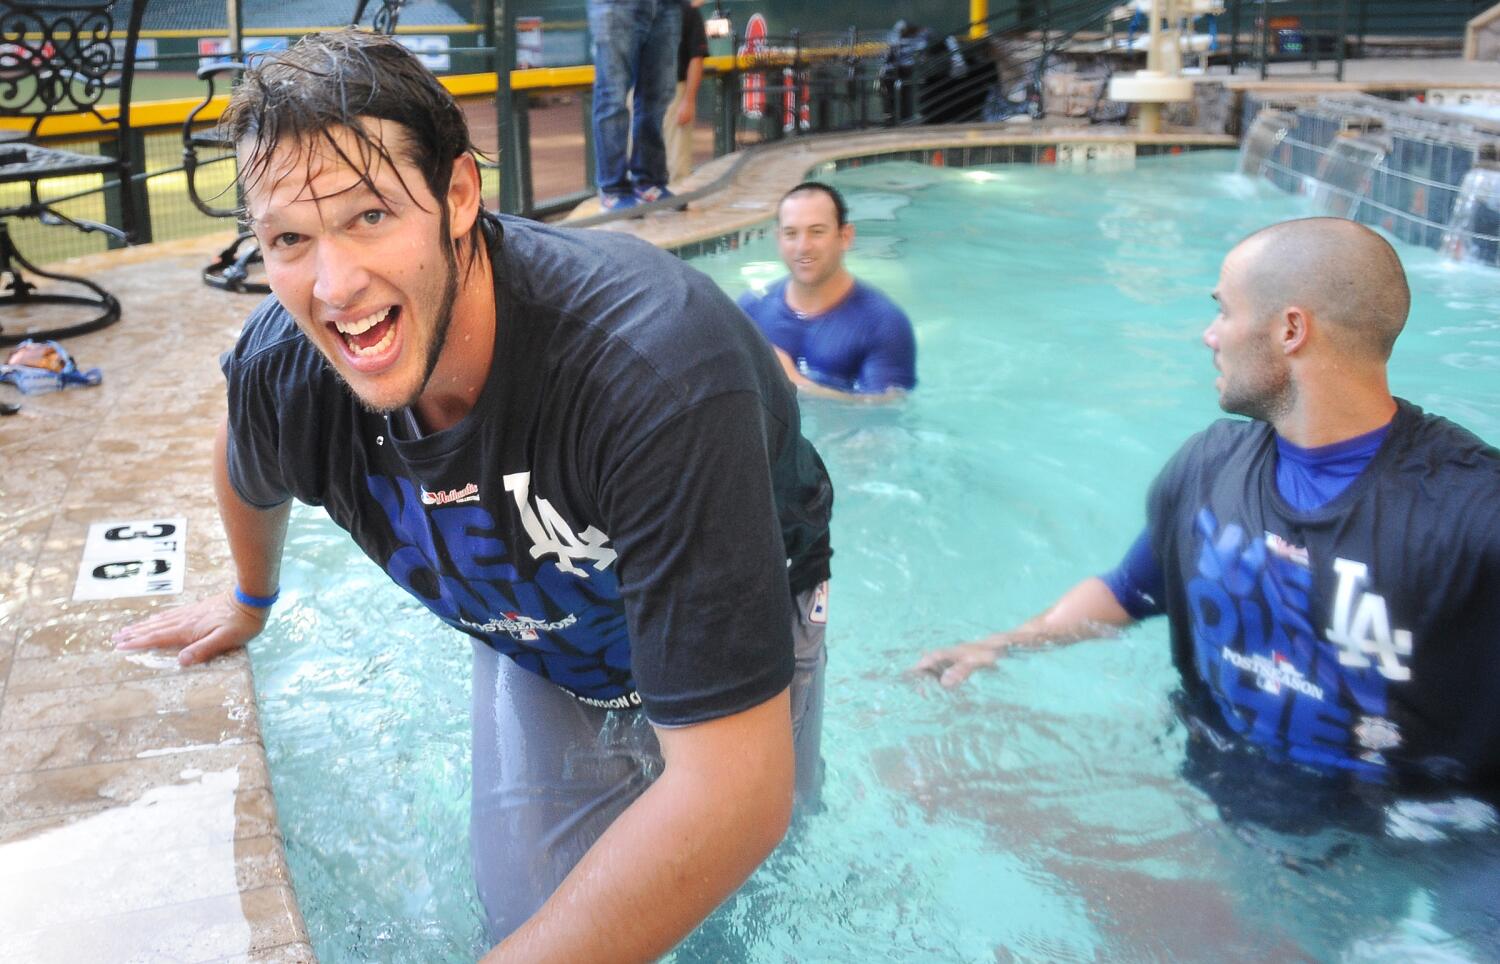 A Phillies pool party in Arizona? They plan to celebrate like Dodgers did 10 years ago